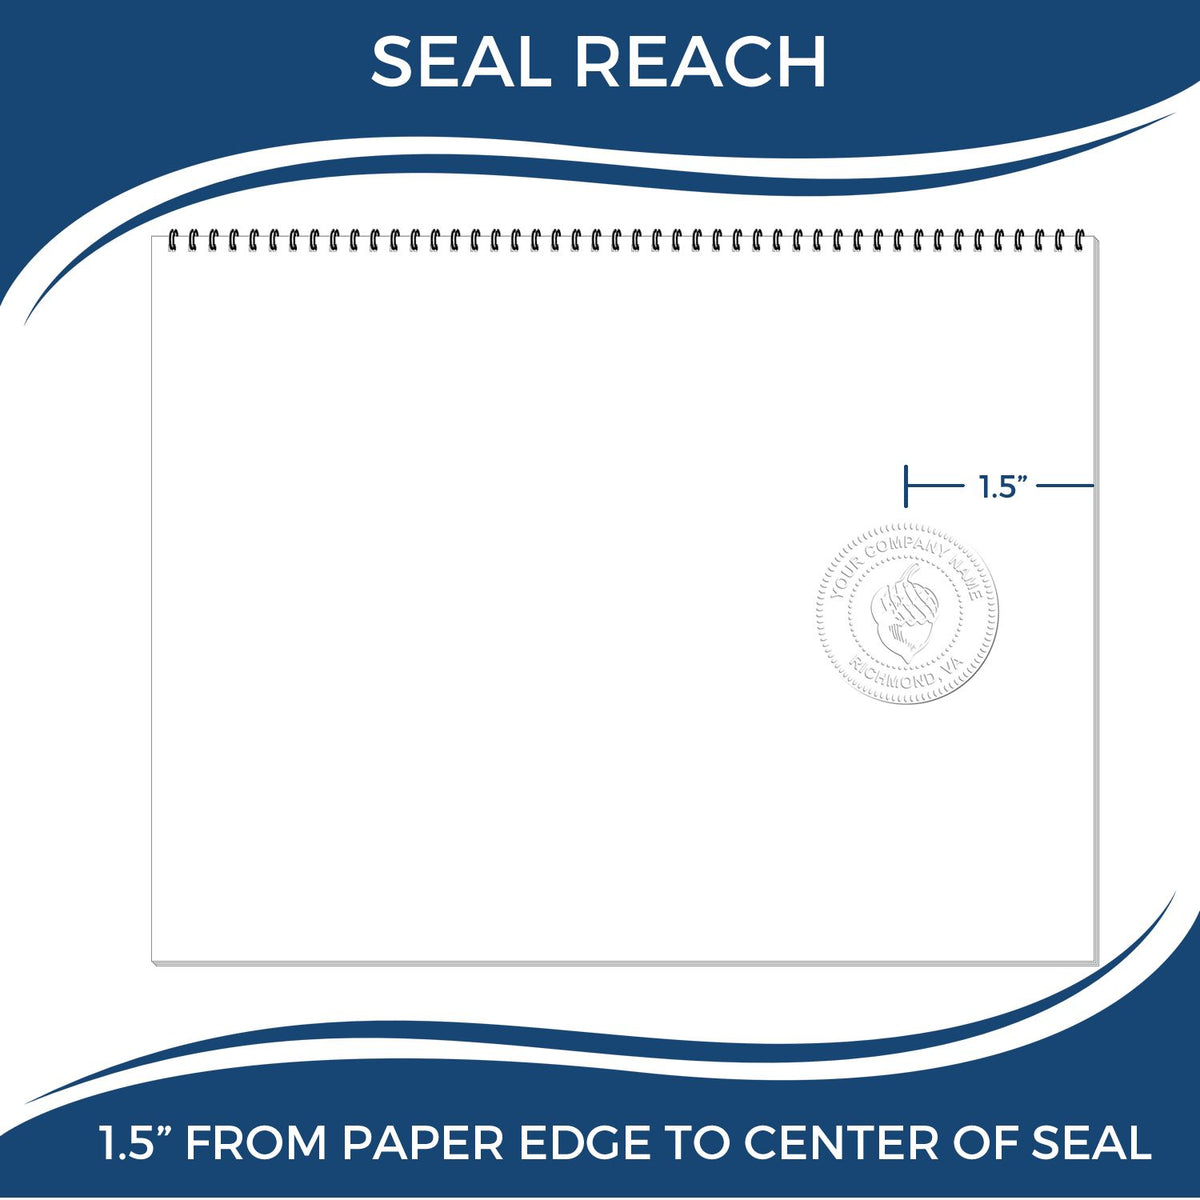 An infographic showing the seal reach which is represented by a ruler and a miniature seal image of the Gift Missouri Architect Seal